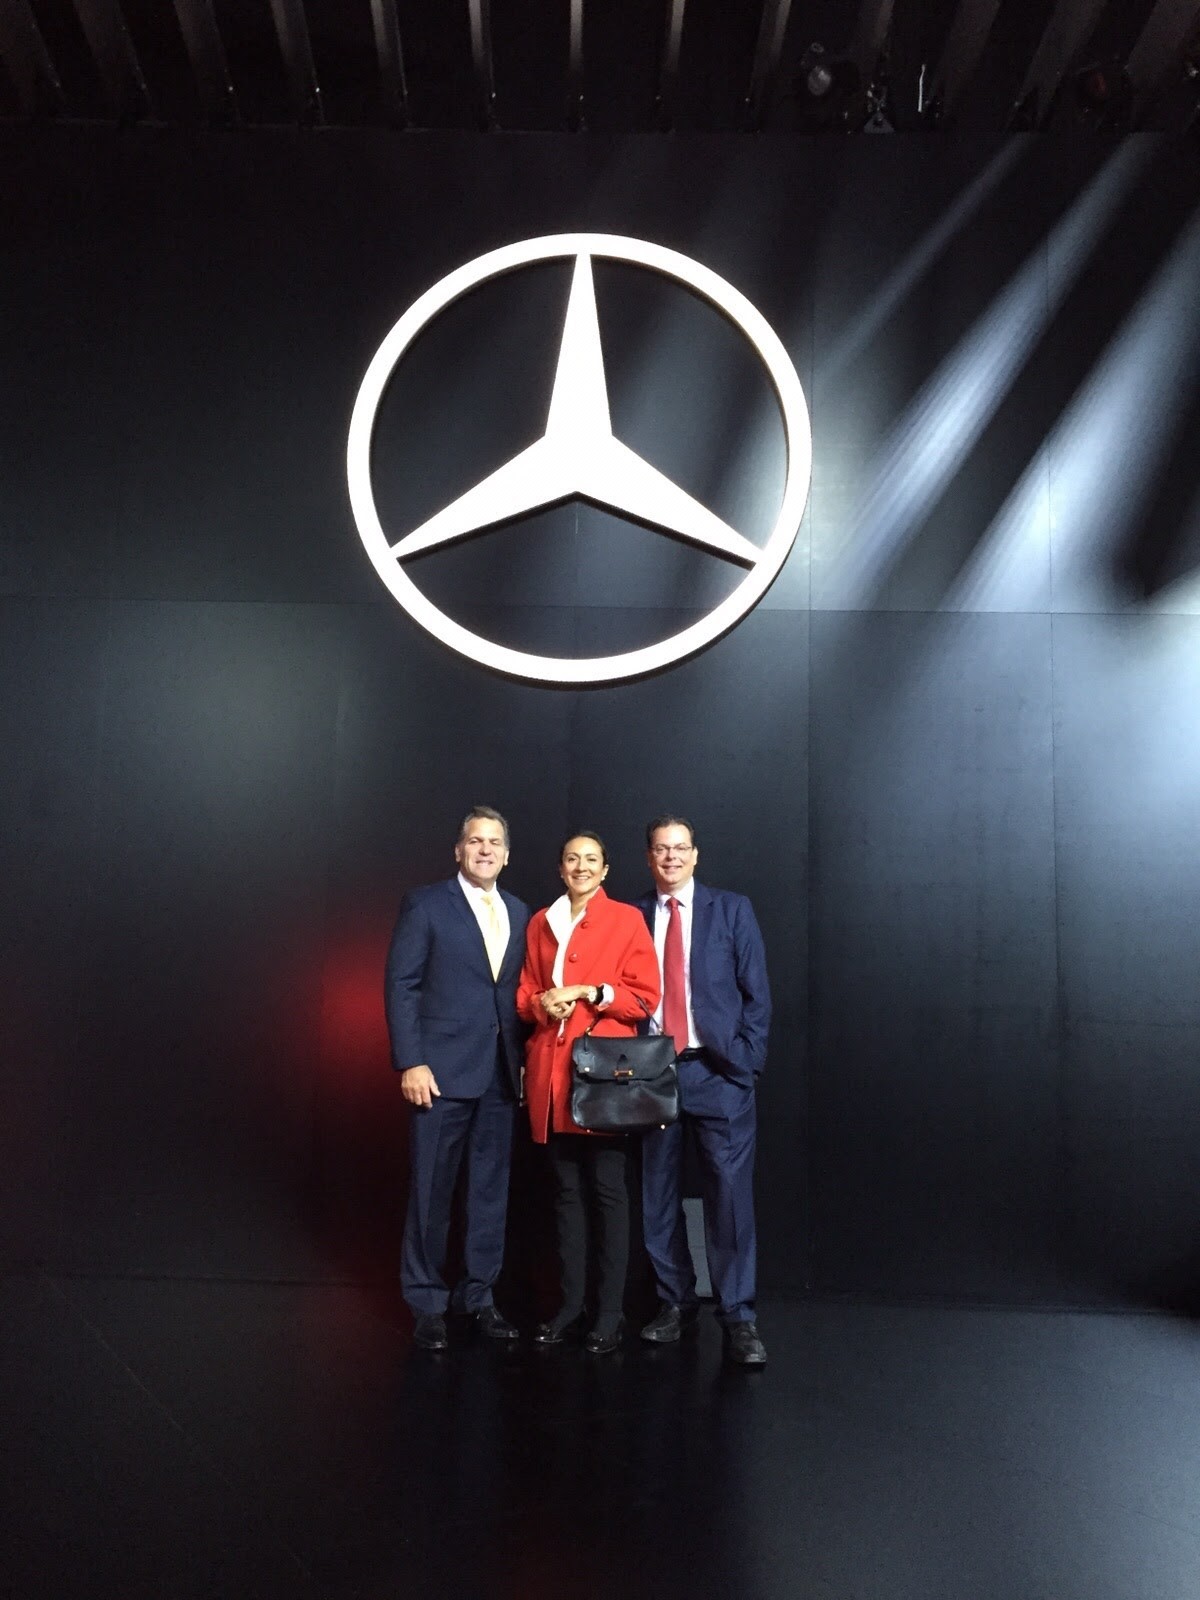 LIASE Group Managing Director for the Americas John Bukowicz (left), LIASE Group Managing Director Asia Vanessa Moriel (center) and LIASE Group President and Managing Director Europe Wolfgang Doell (right) standing in front of the Mercedes-Benz logo at the Frankfurt Motor Show.